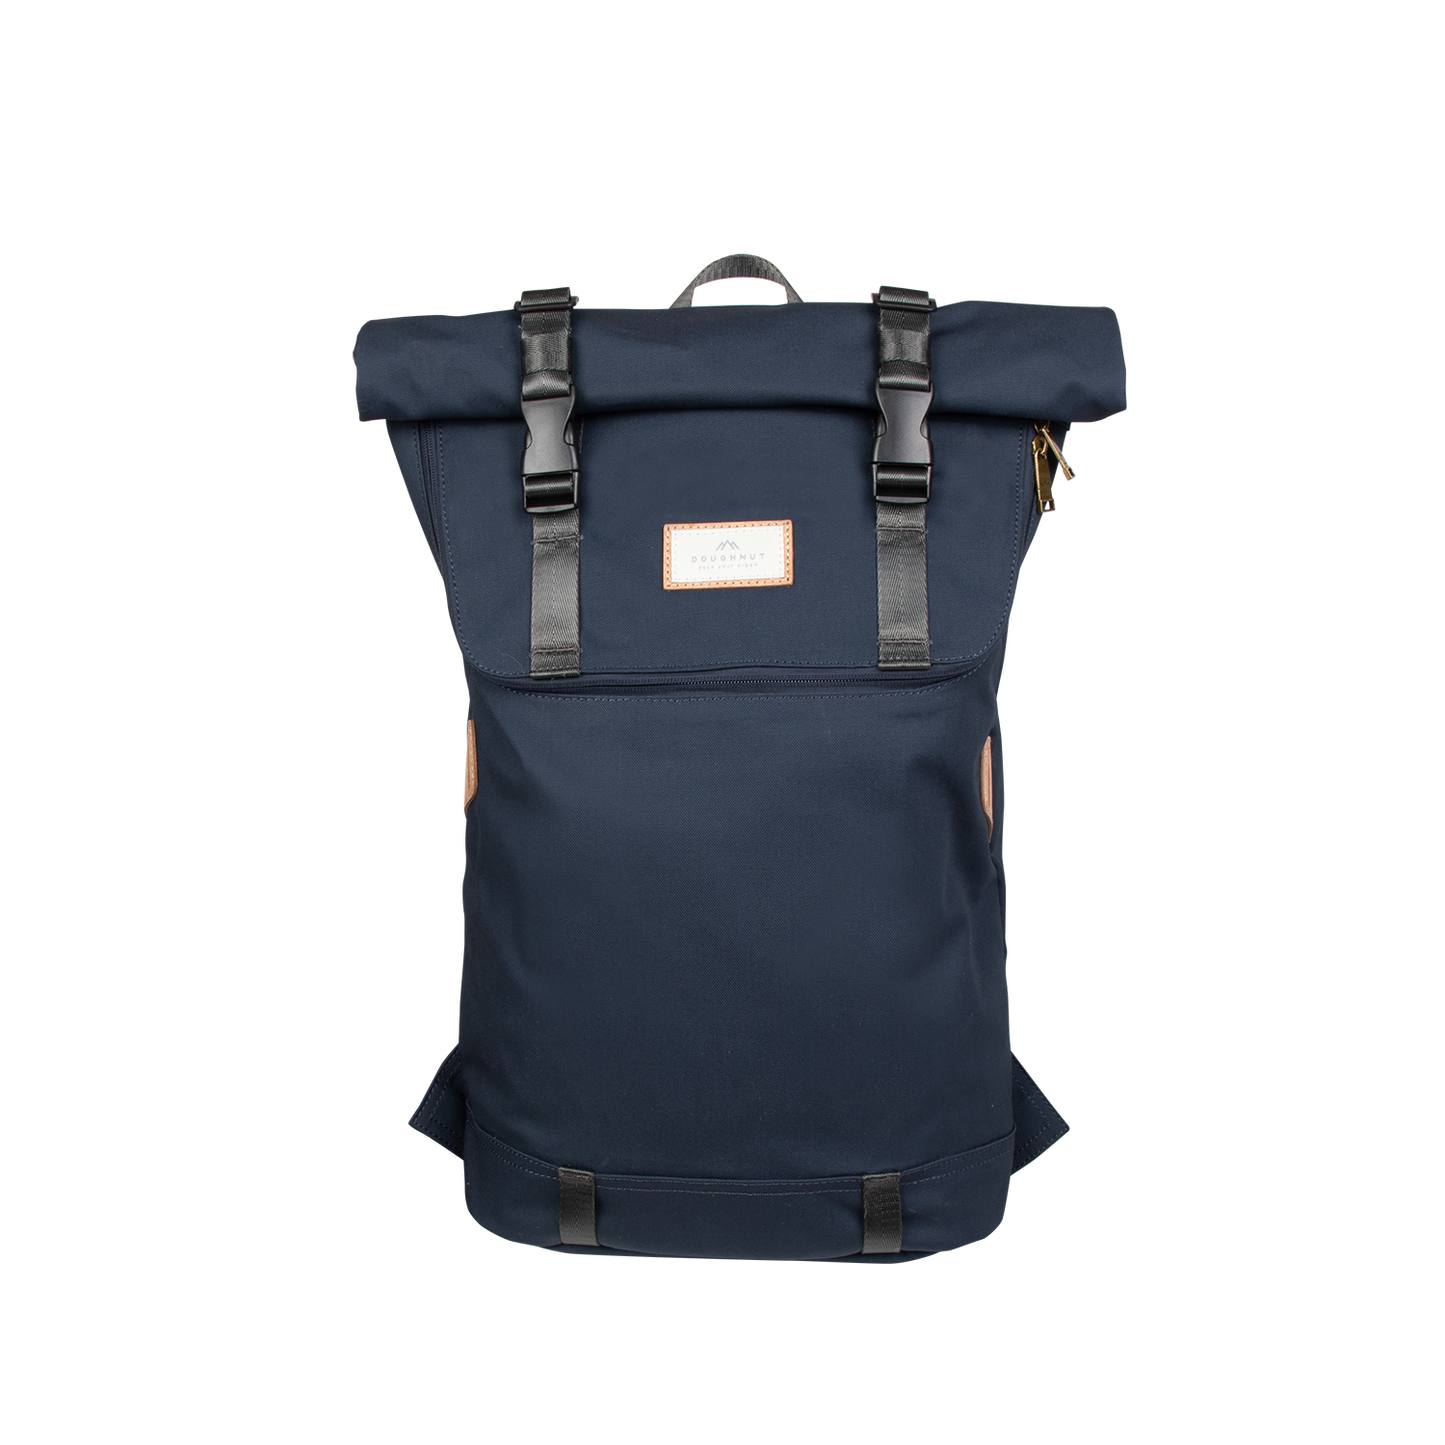 Christopher Pfc Free Series Backpack